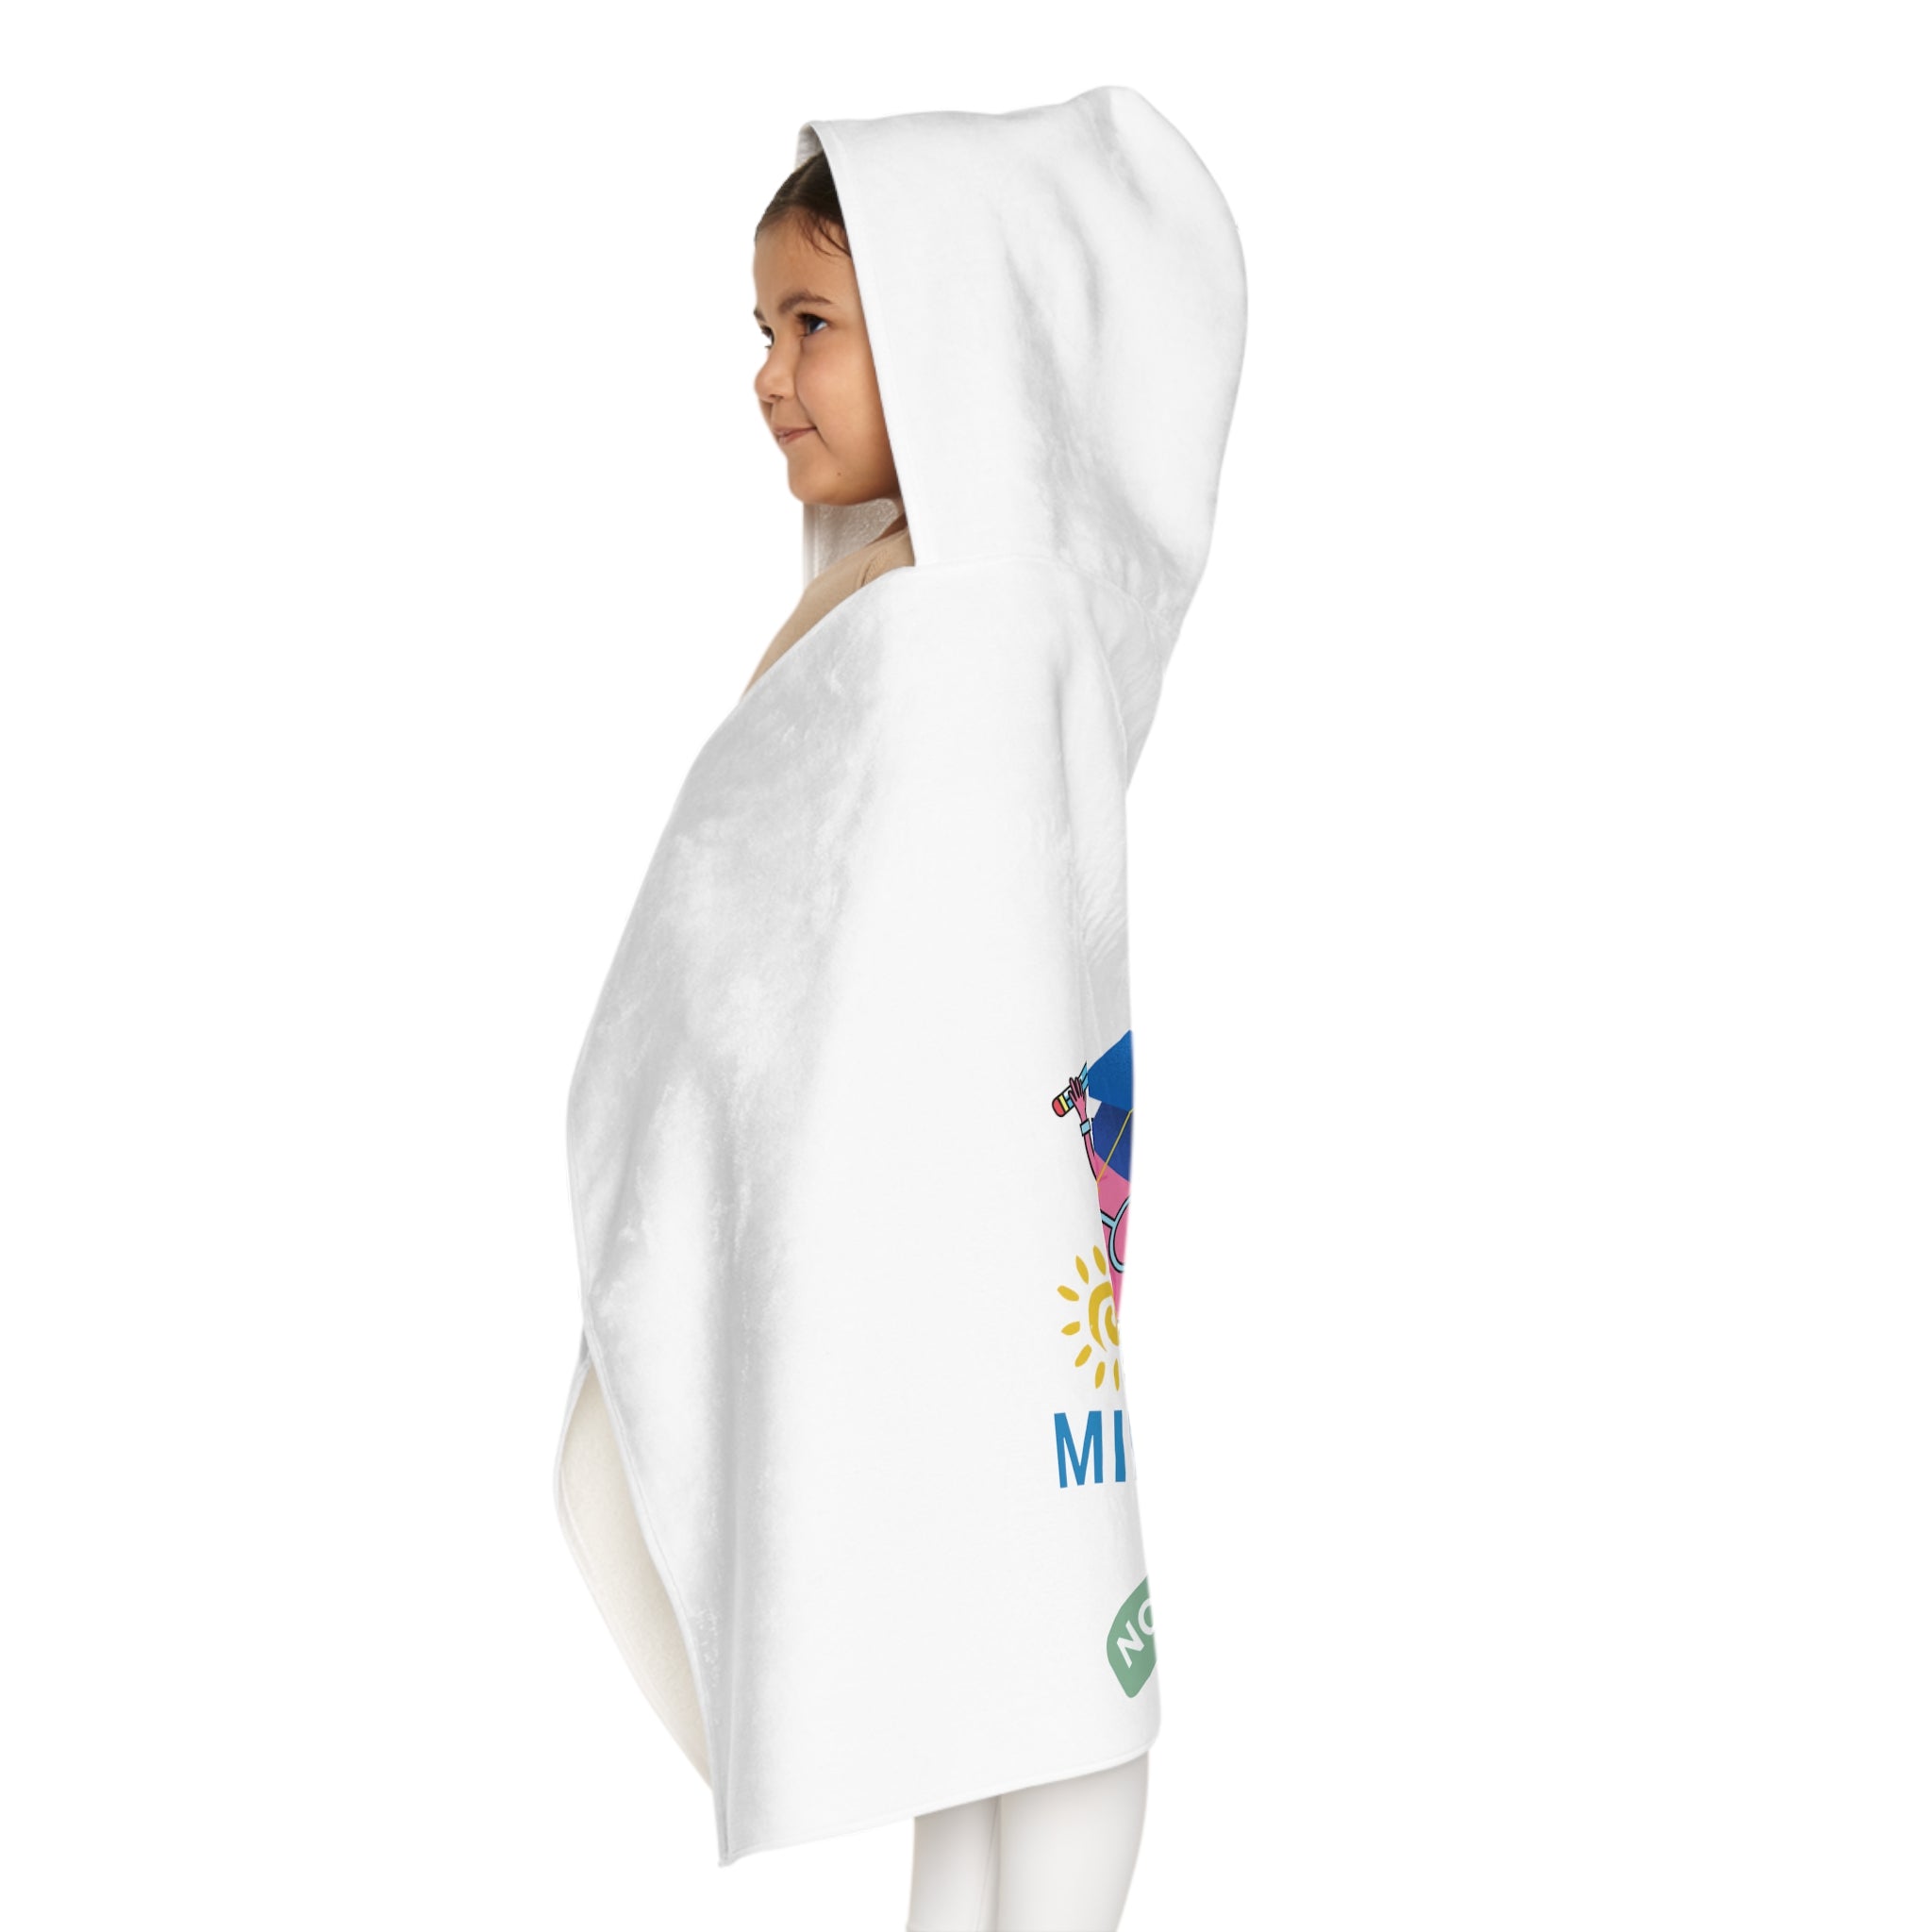 Minerallymade | Nourishing IQs Naturally l Youth Hooded Towel